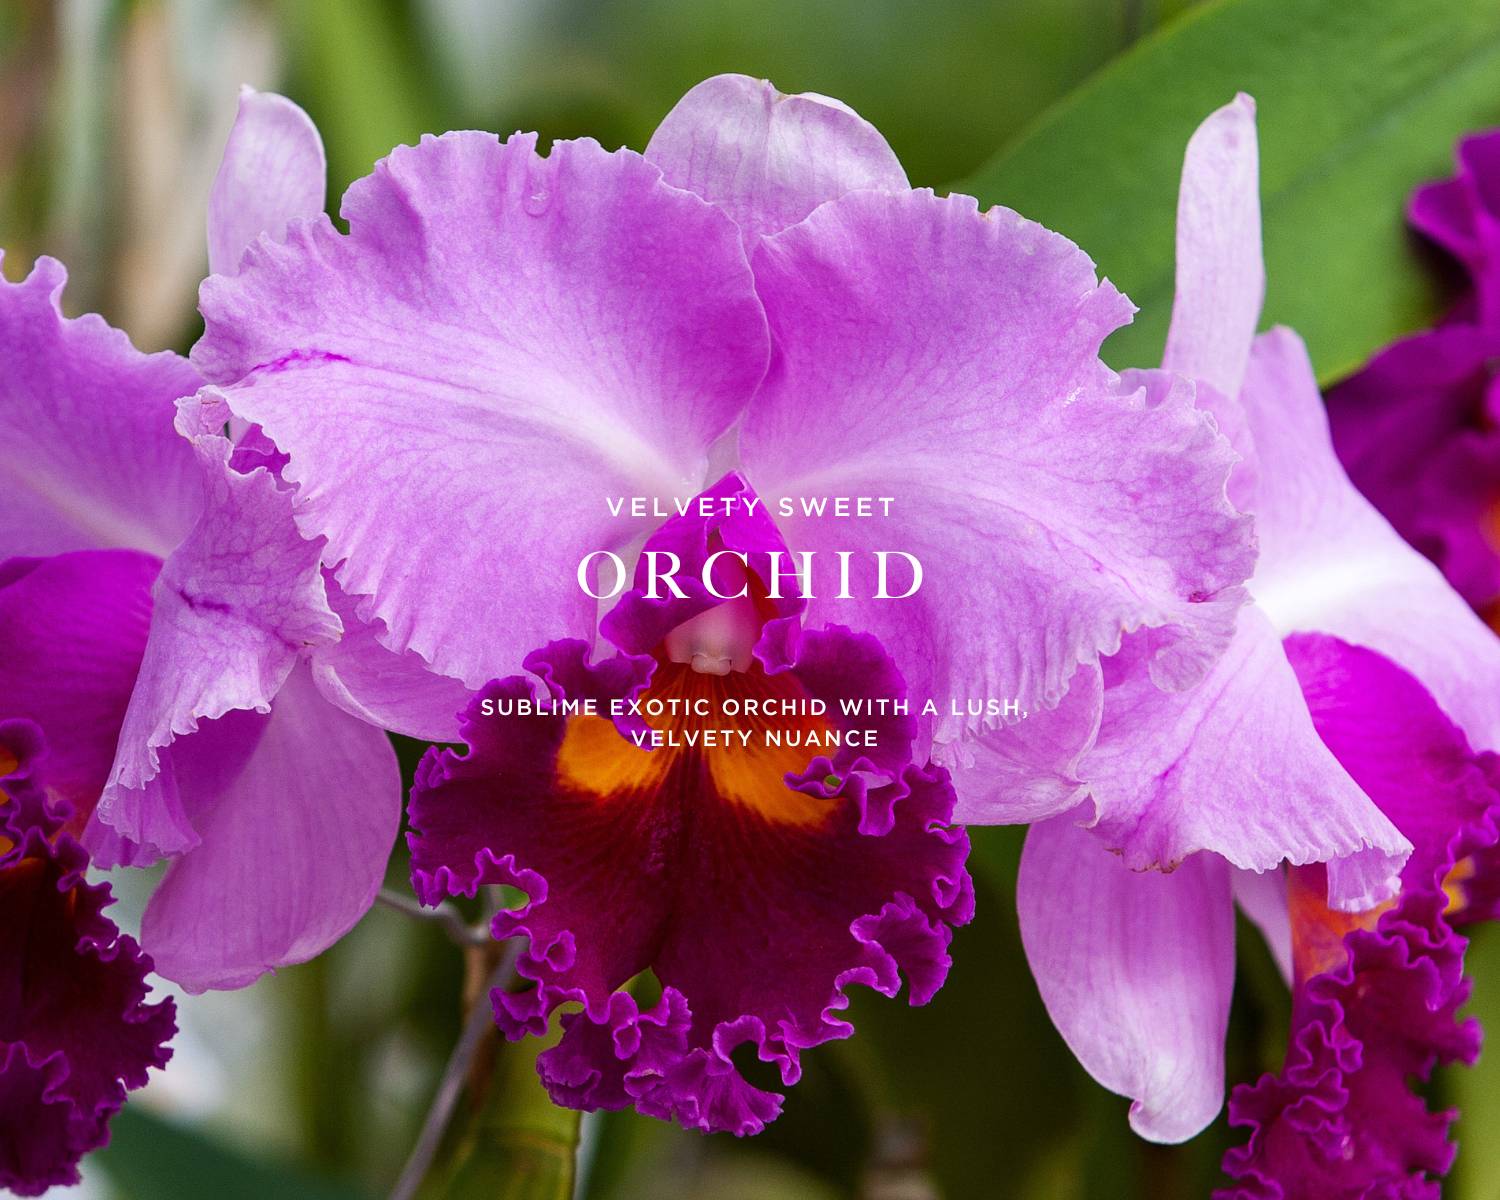 Caswell-Massey Orchid Perfume for Women: image showing pink and purple orchids to represent primary scent notes